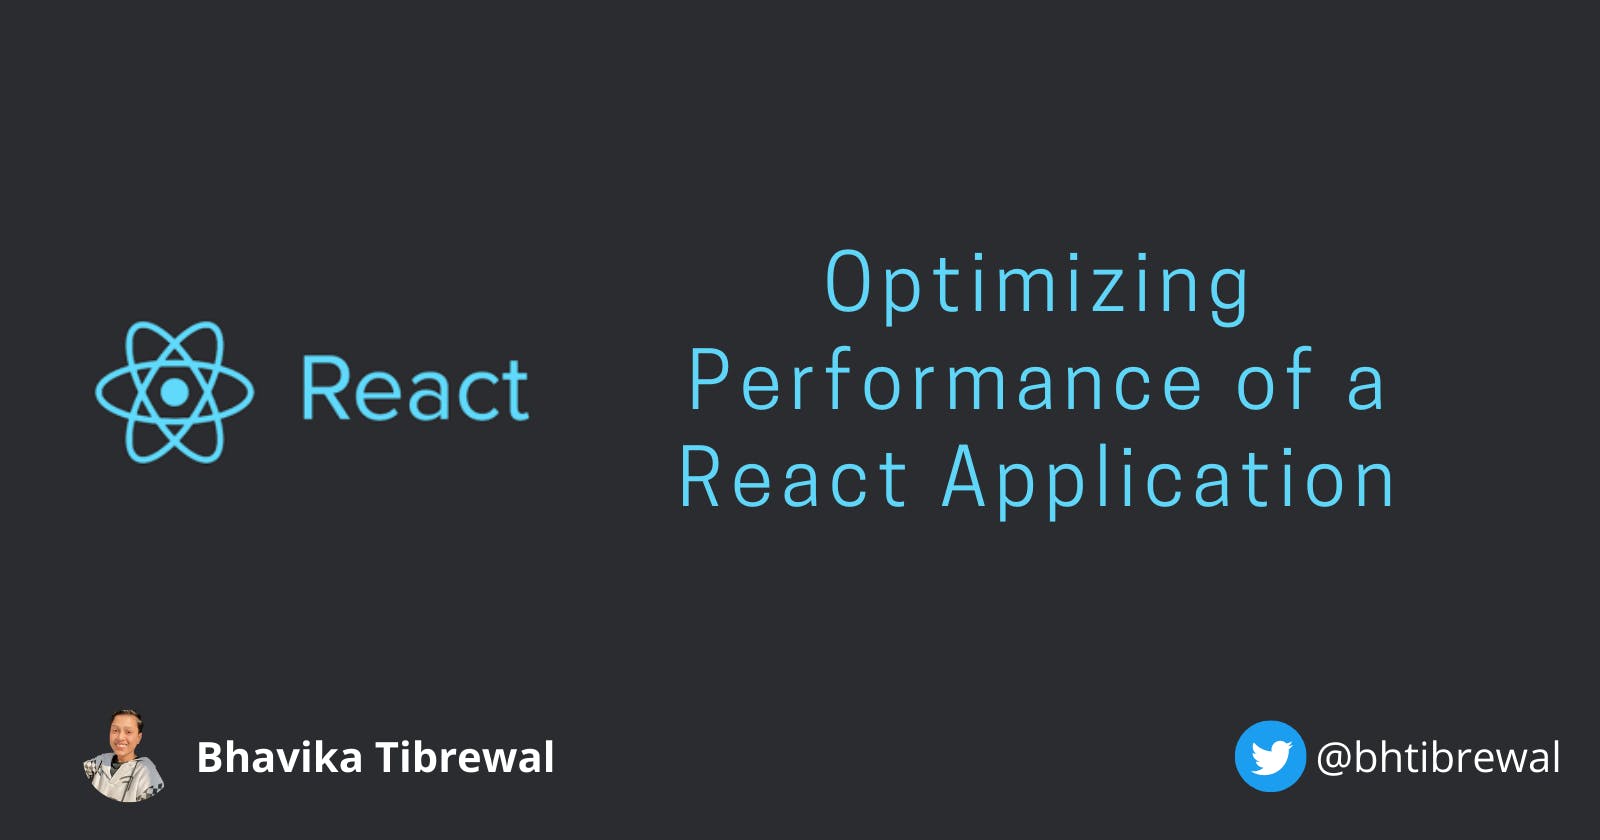 Optimising Performance of a React Application